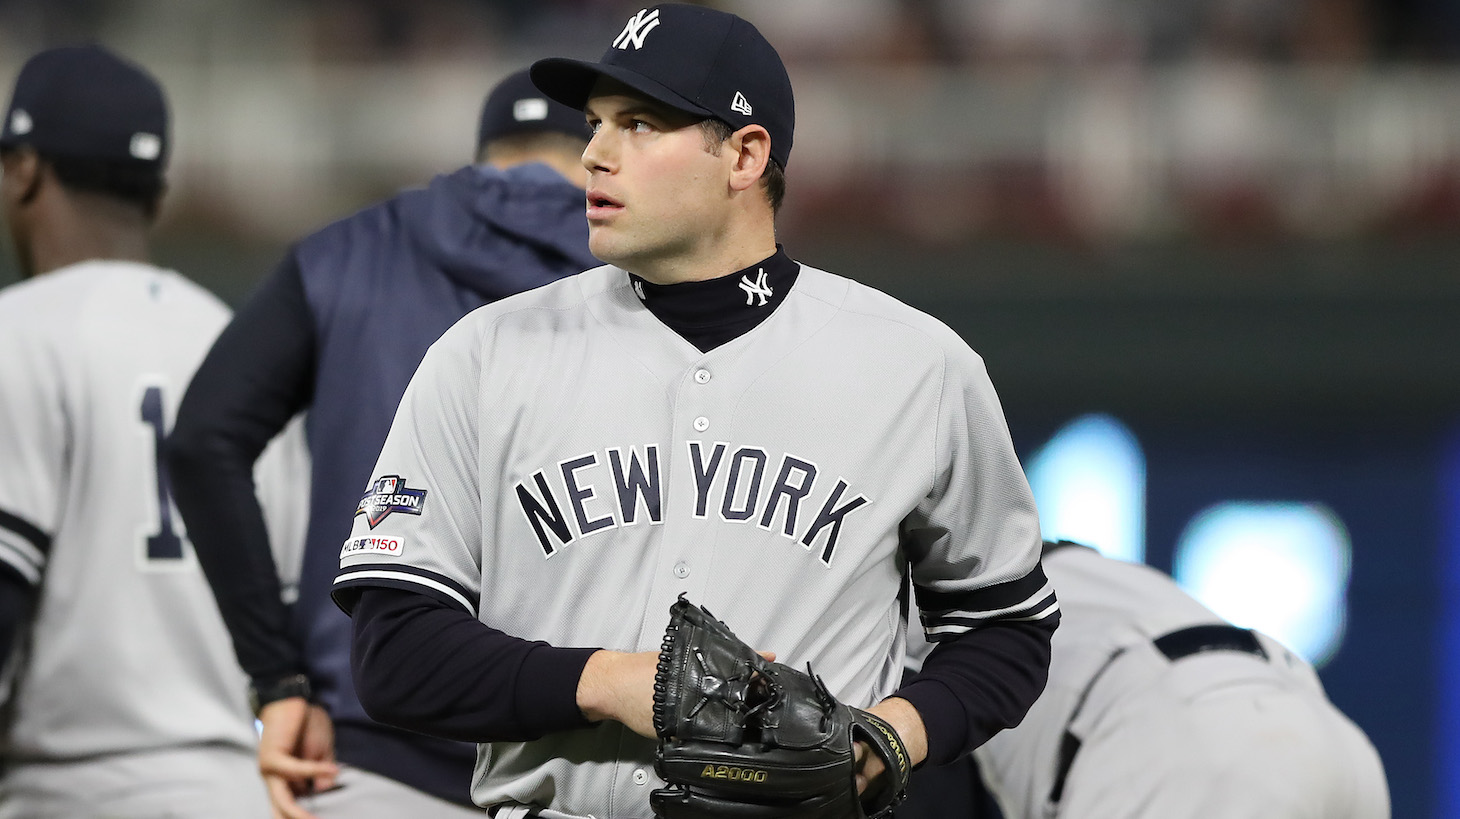 MINNEAPOLIS, MINNESOTA - OCTOBER 07: Adam Ottavino #0 of the New York Yankees is pulled after walking Nelson Cruz #23 of the Minnesota Twins in game three of the American League Division Series at Target Field on October 07, 2019 in Minneapolis, Minnesota. (Photo by Elsa/Getty Images)